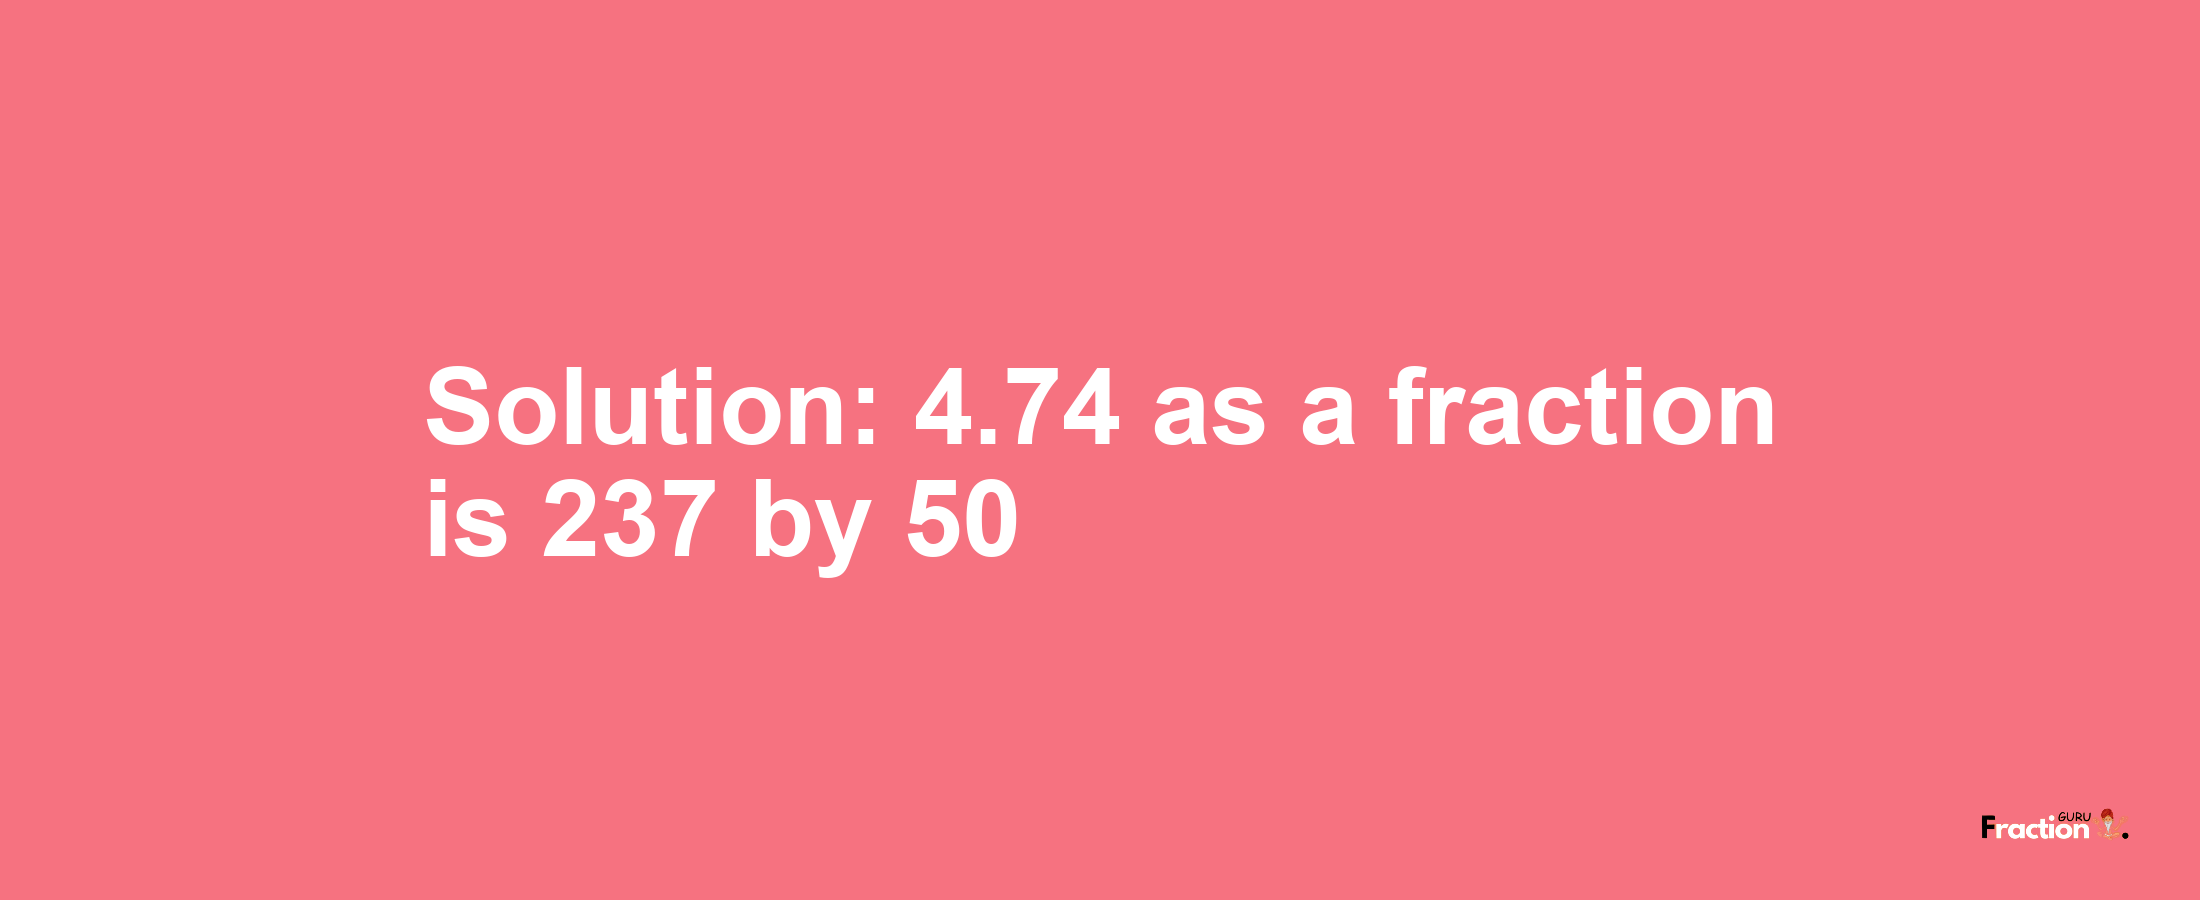 Solution:4.74 as a fraction is 237/50